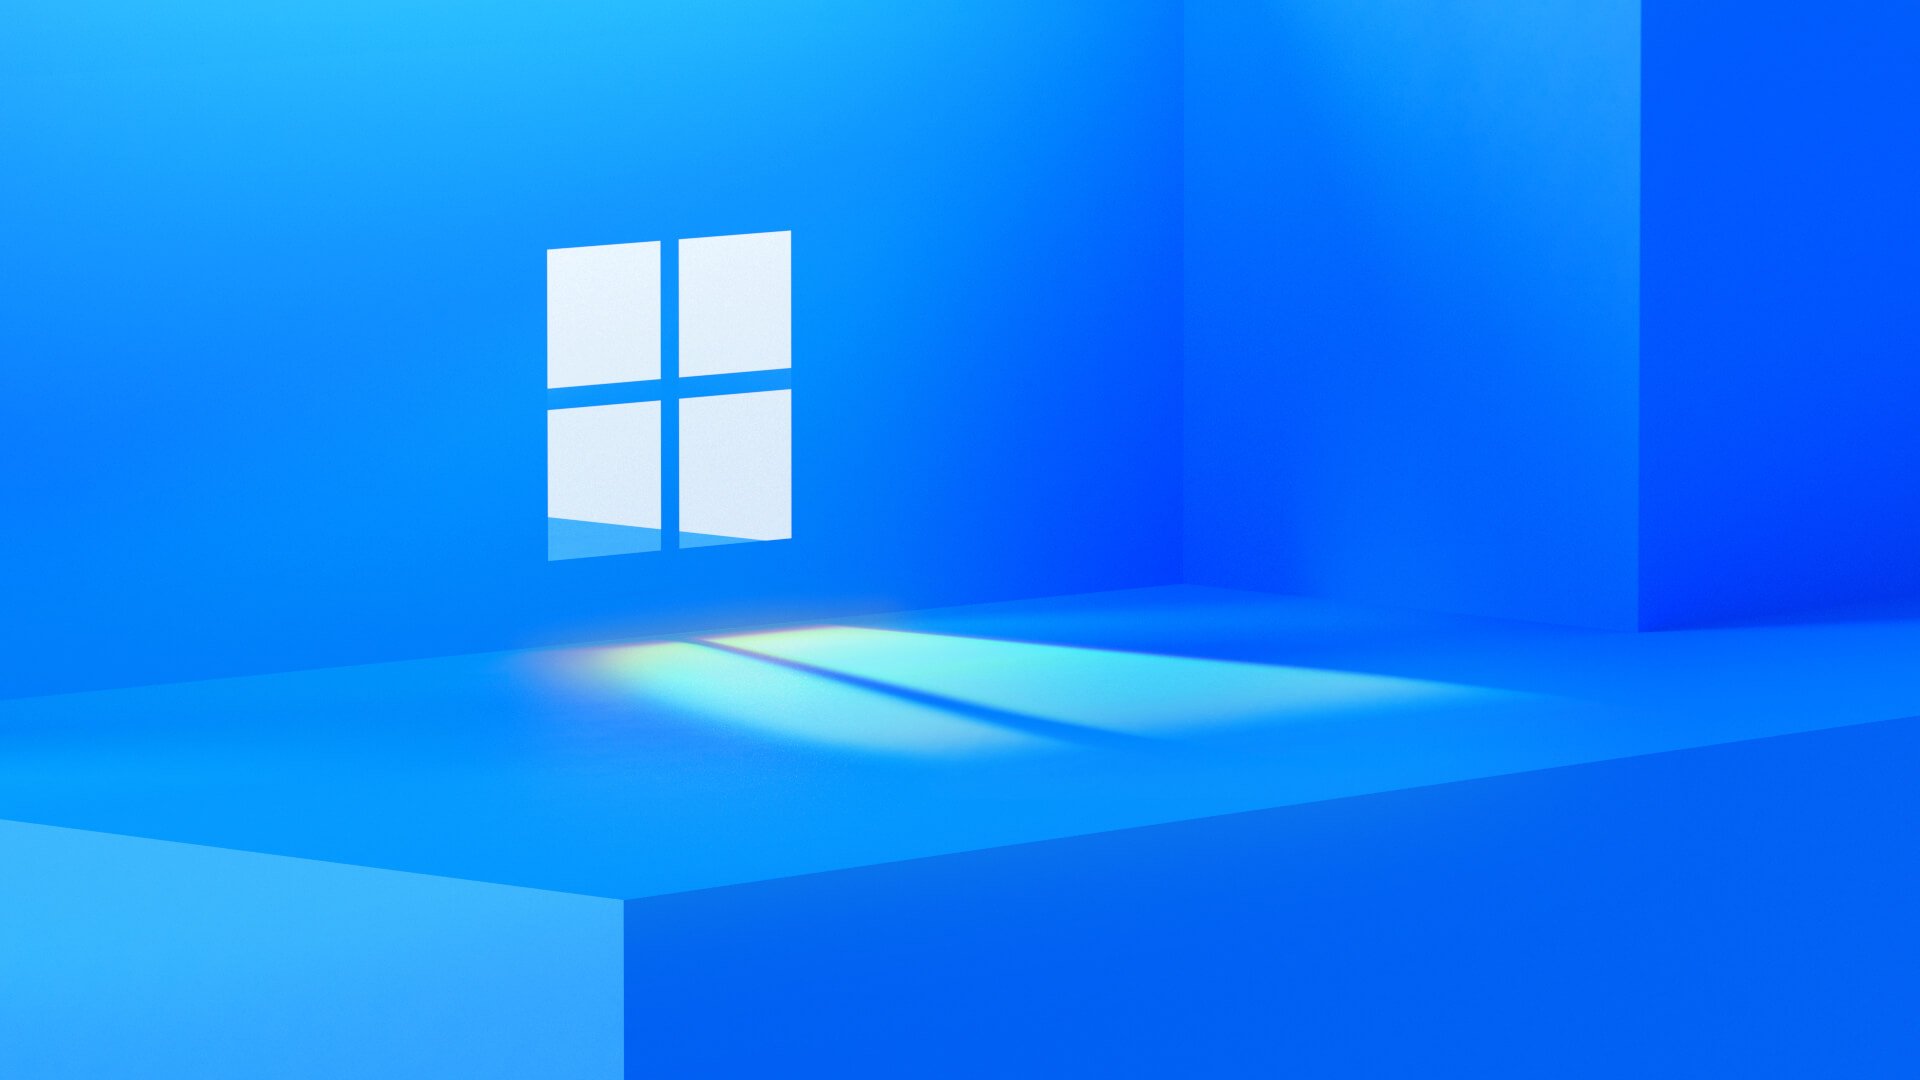 Microsoft’s ’Next Generation’ of Windows Plots the Course for Significant Changes